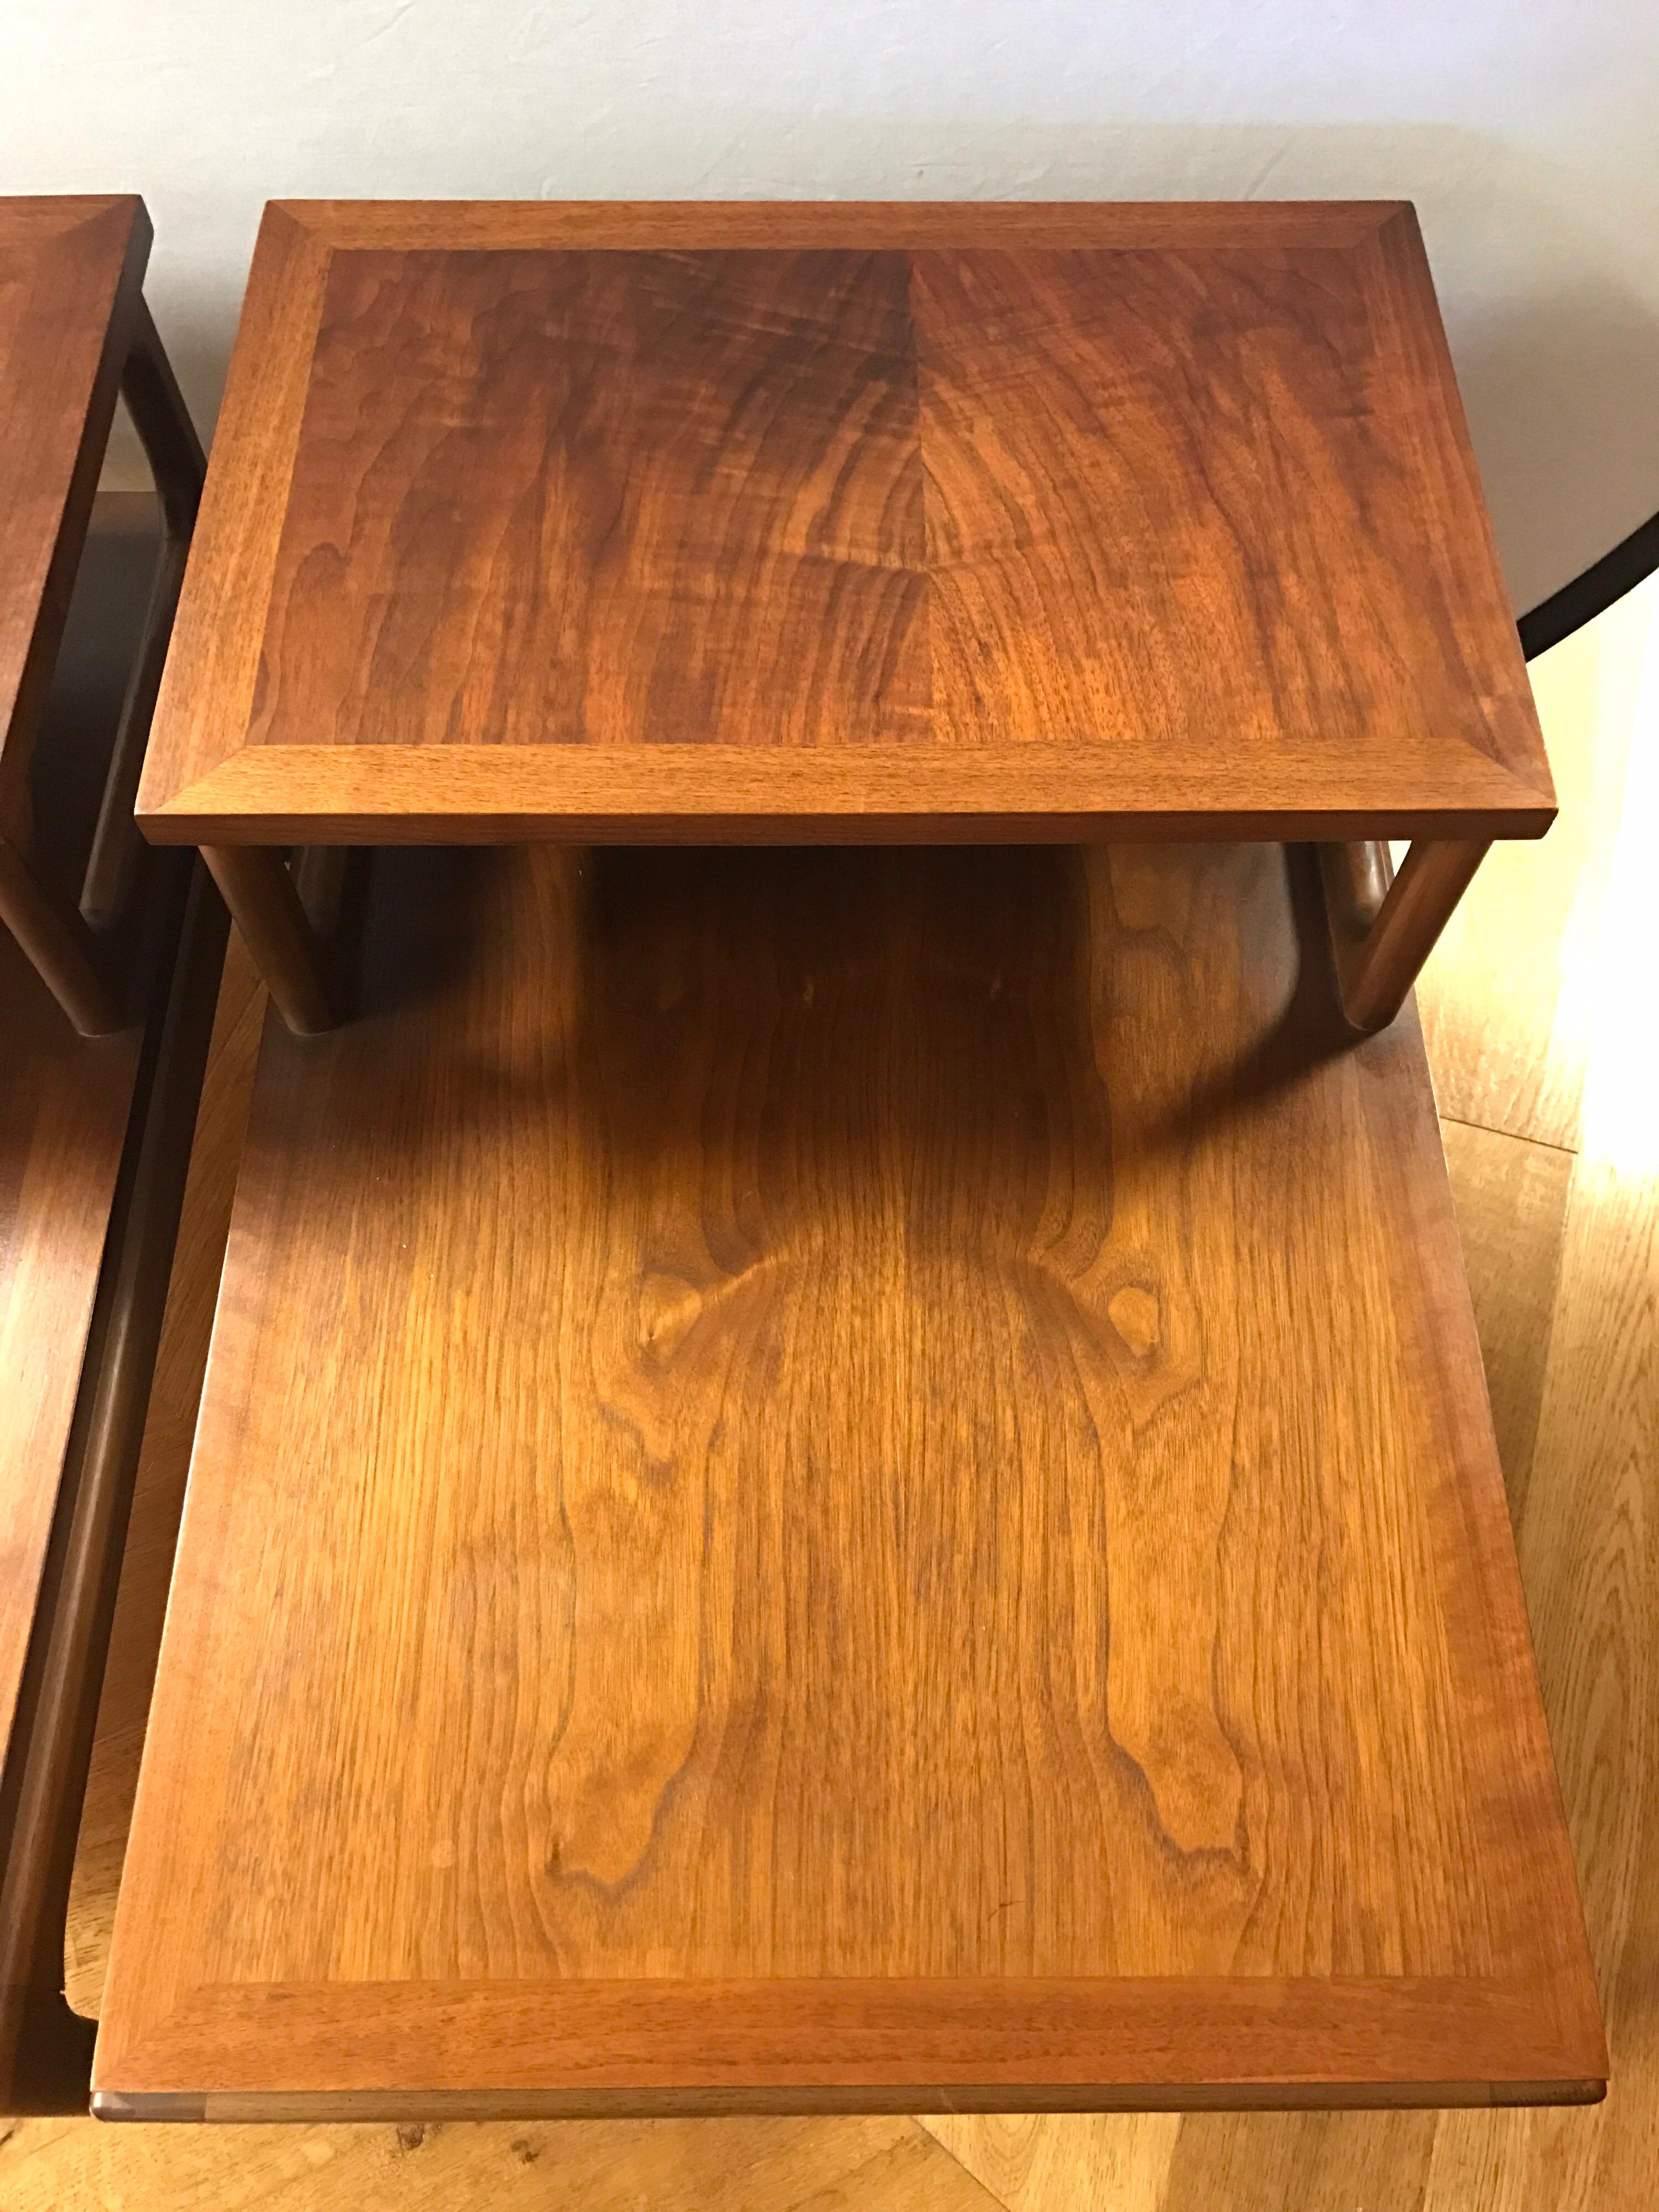 Pair of Lane Altavista end tables. Nightstands with two levels.